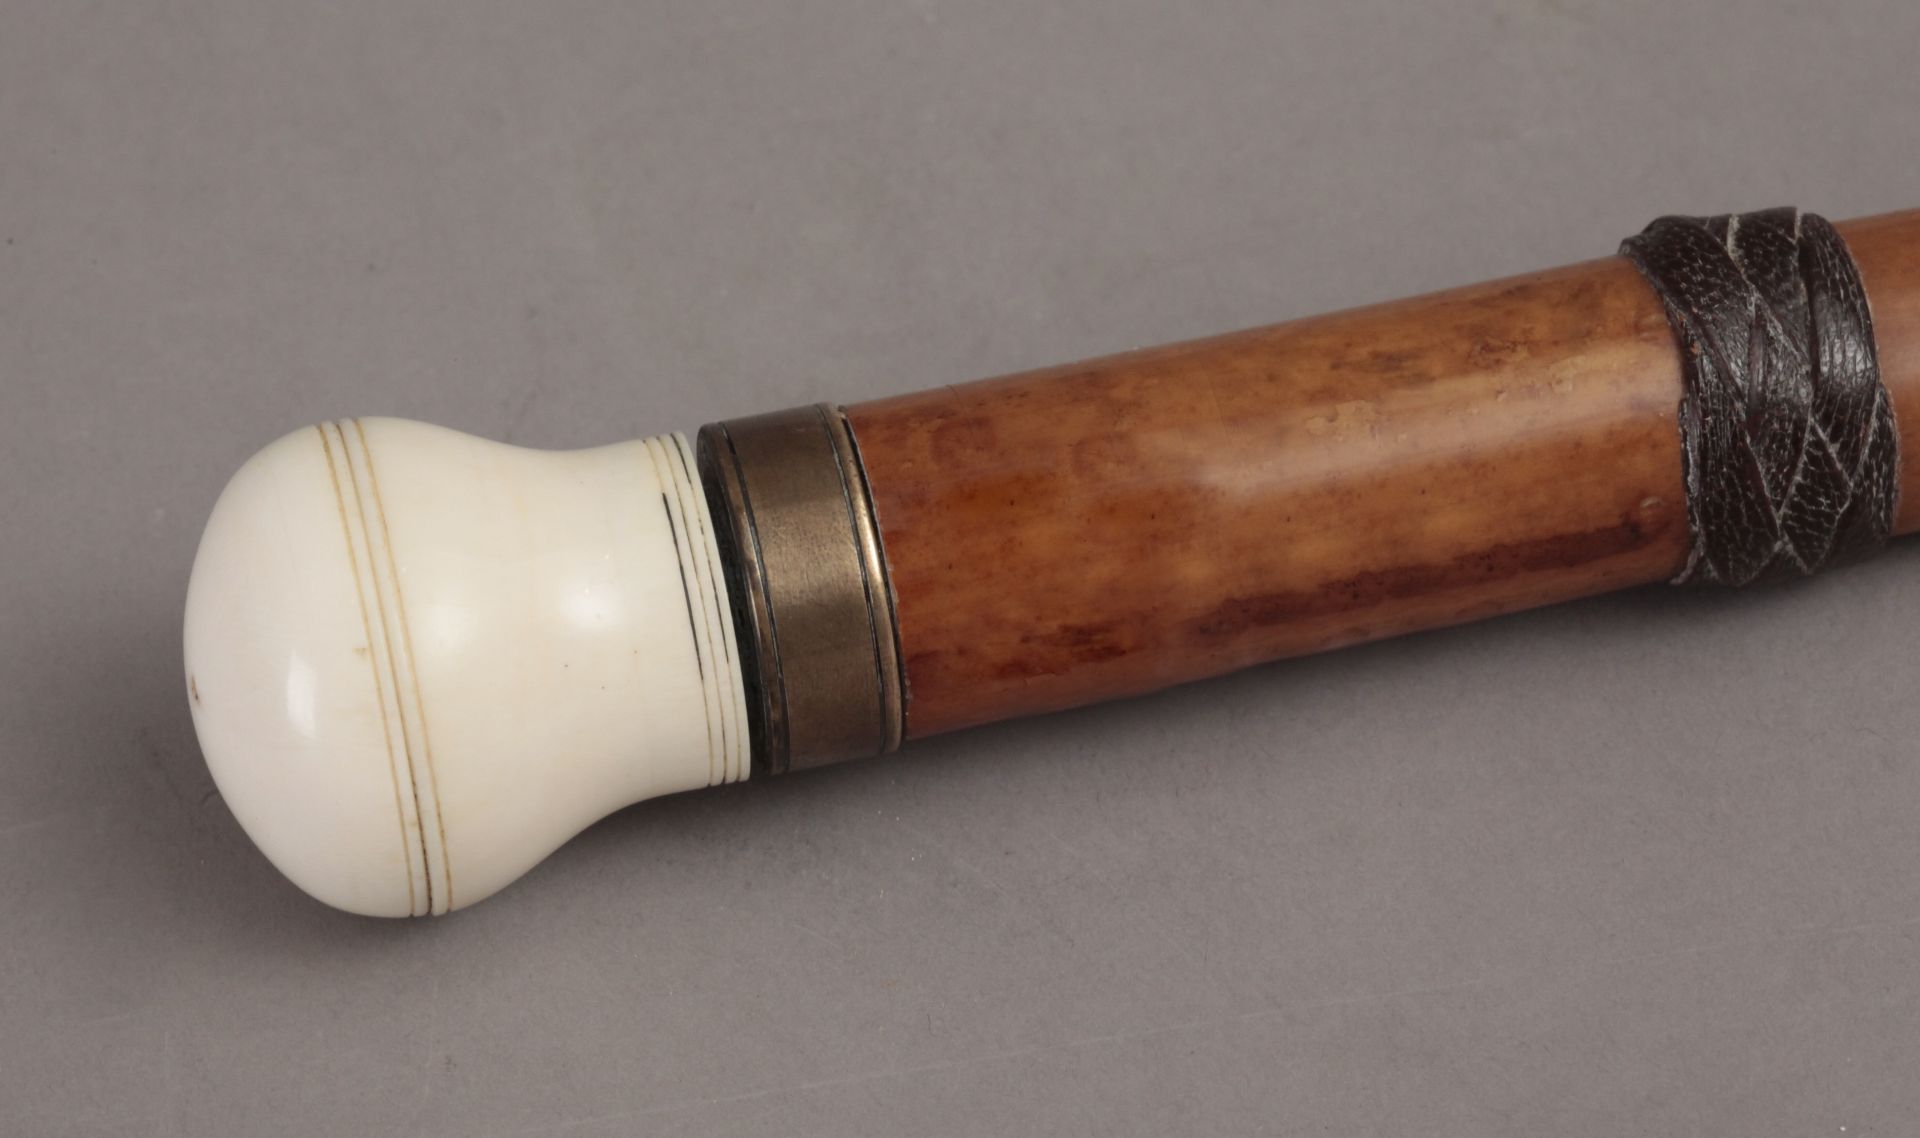 A 19th century fruit tree wood and ivory walking cane